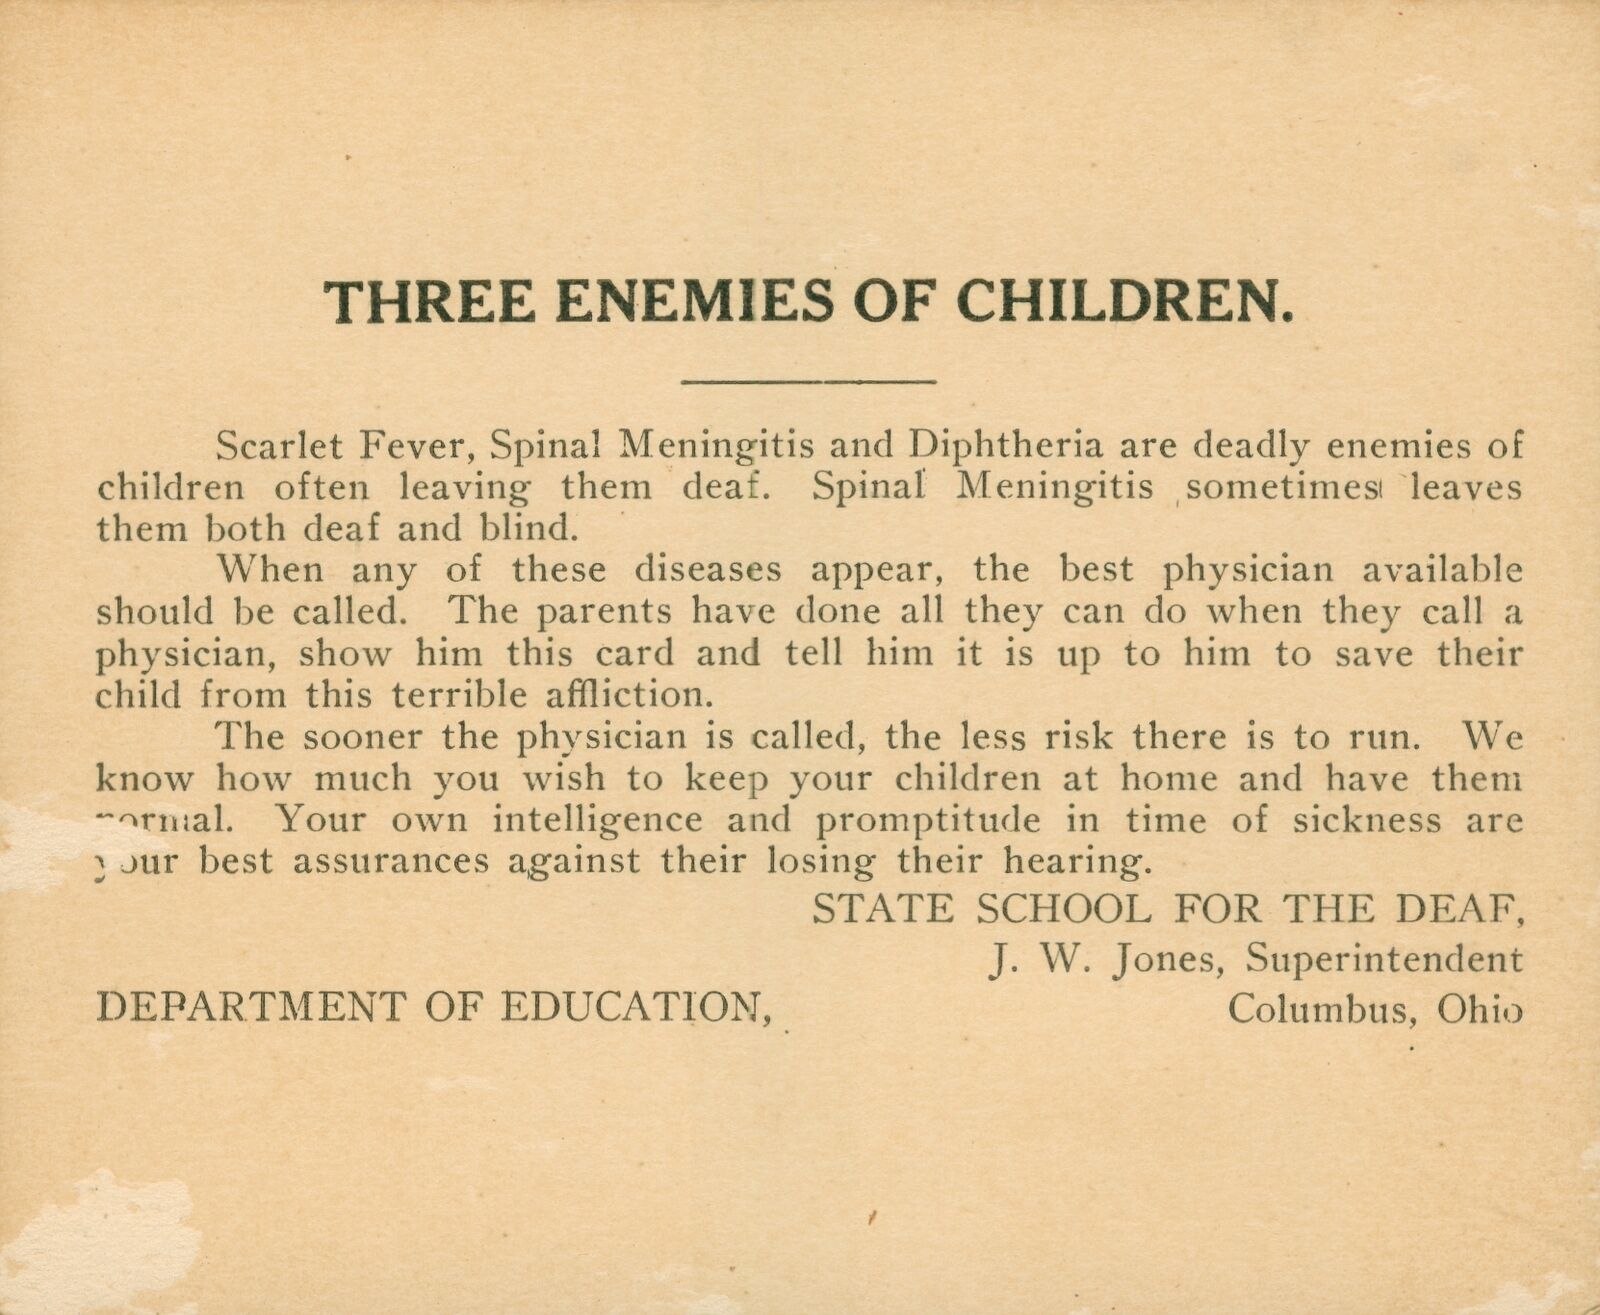 c1925 Ohio State School For The Deaf Education Card Three Enemies Of Children 